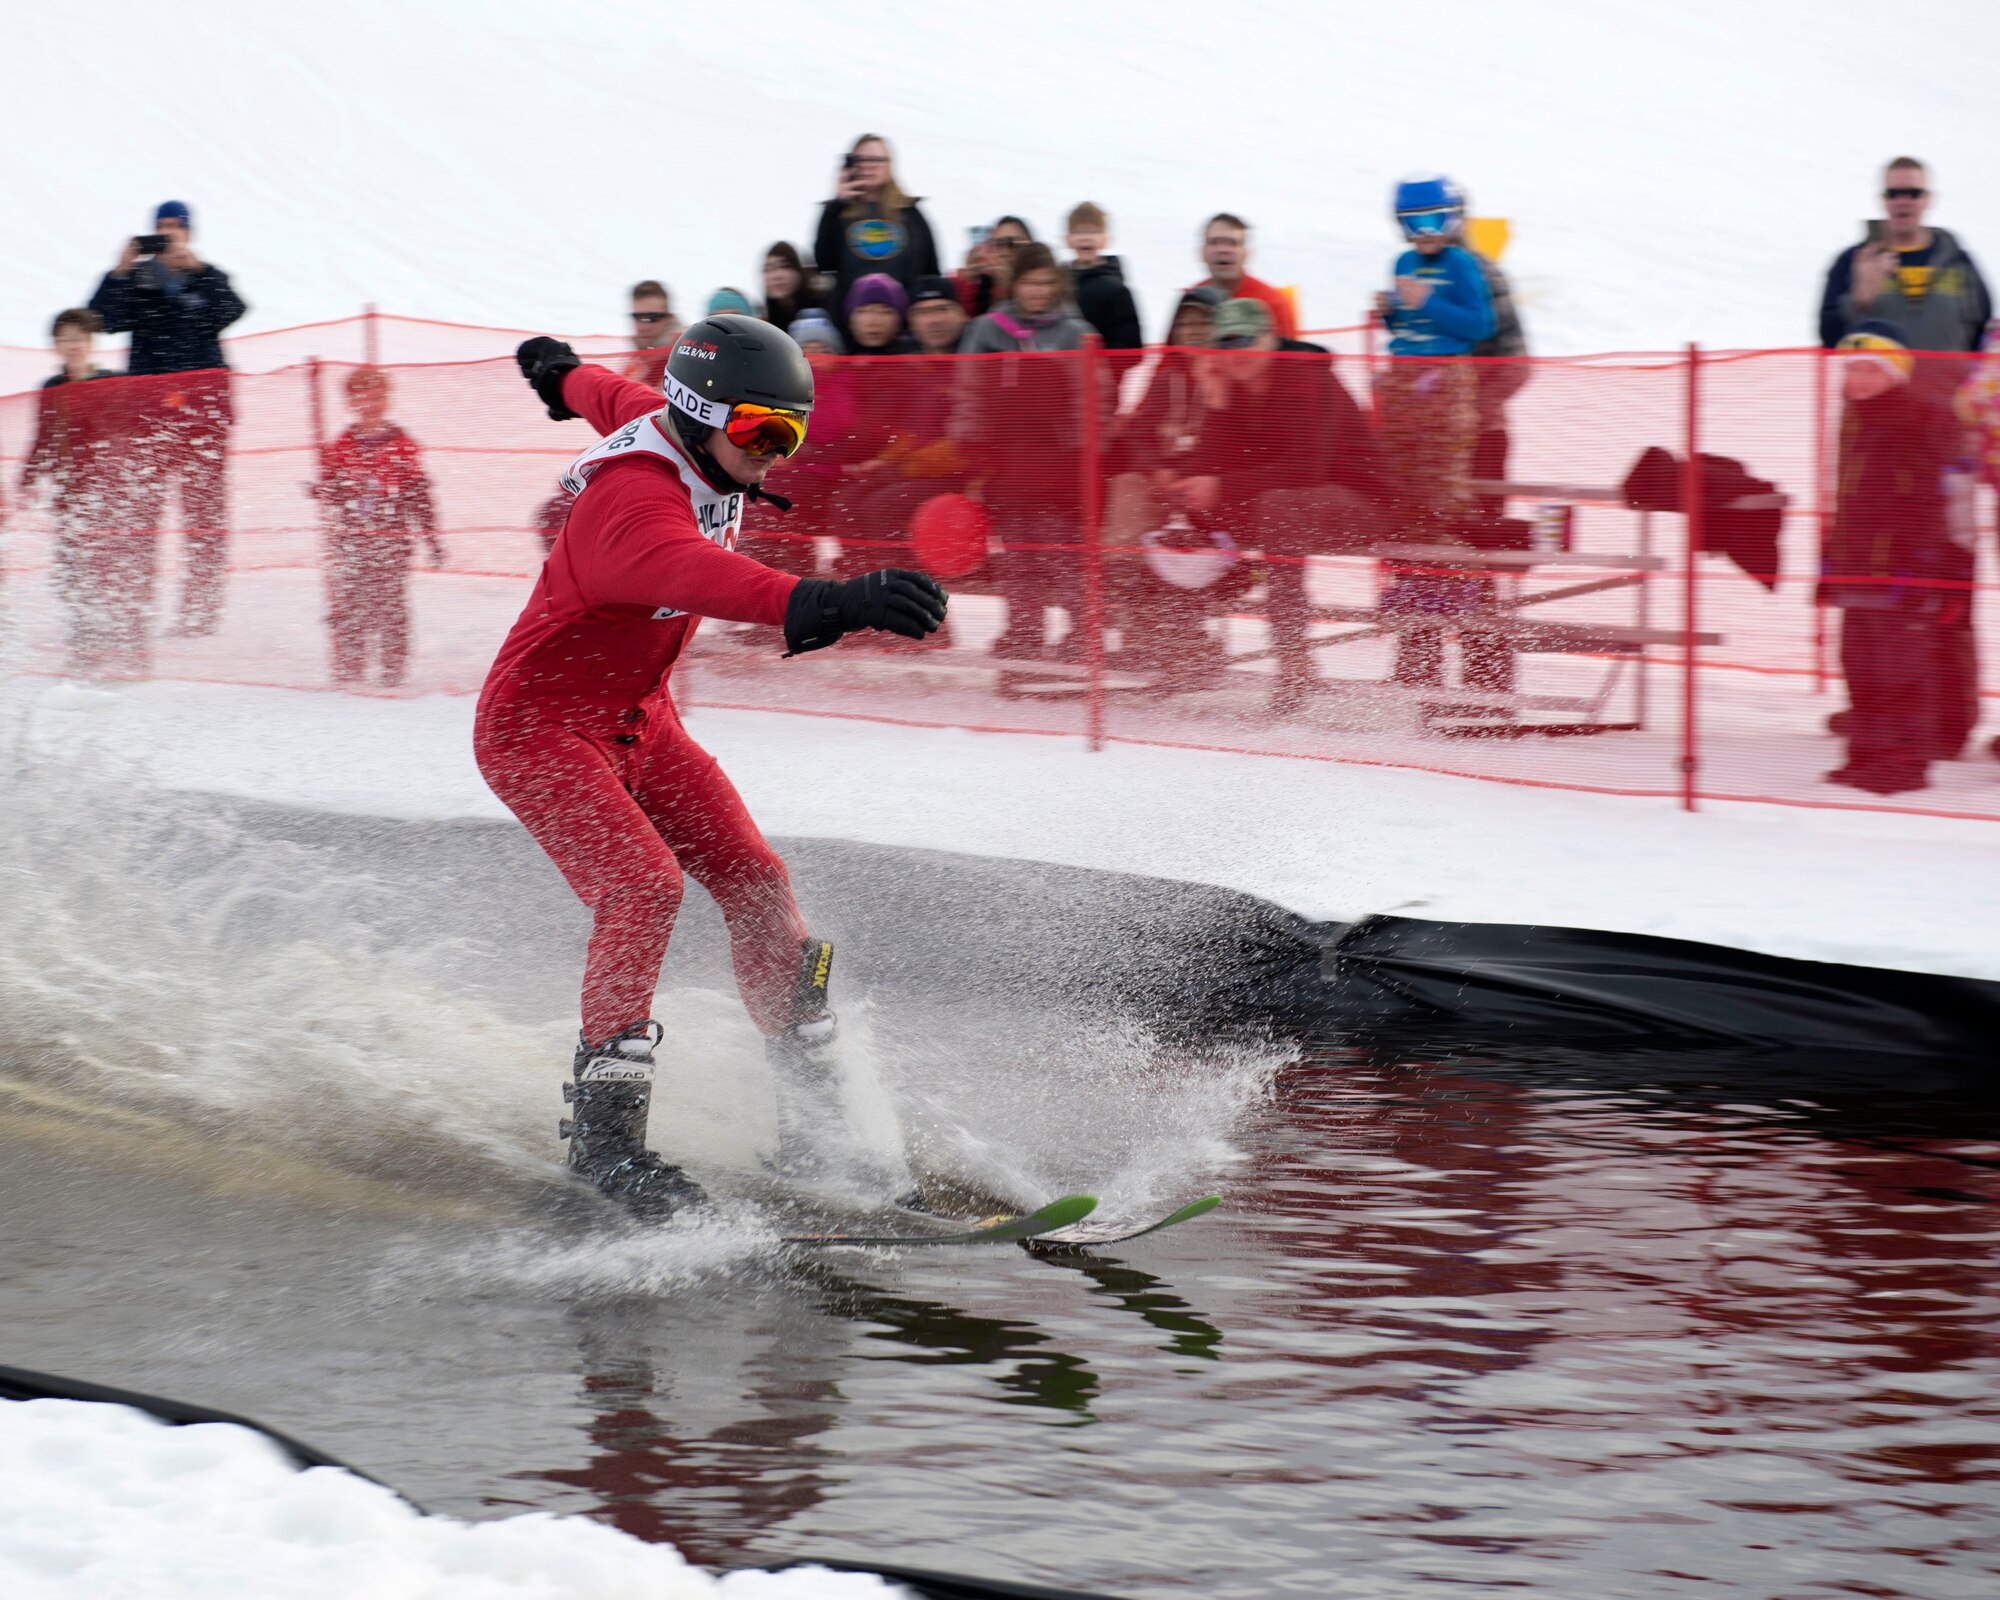 Ben Fenaughty, a participant of the 2018 Slush Cup, skids across the pond to the finish line at Joint Base Elmendorf-Richardson’s Hillberg Ski Area, March 18, 2018. The Slush Cup is a two-fold annual event celebrating the change in weather, consisting of skiers and snowboarders trying to make it across a man-made slush pond without falling.